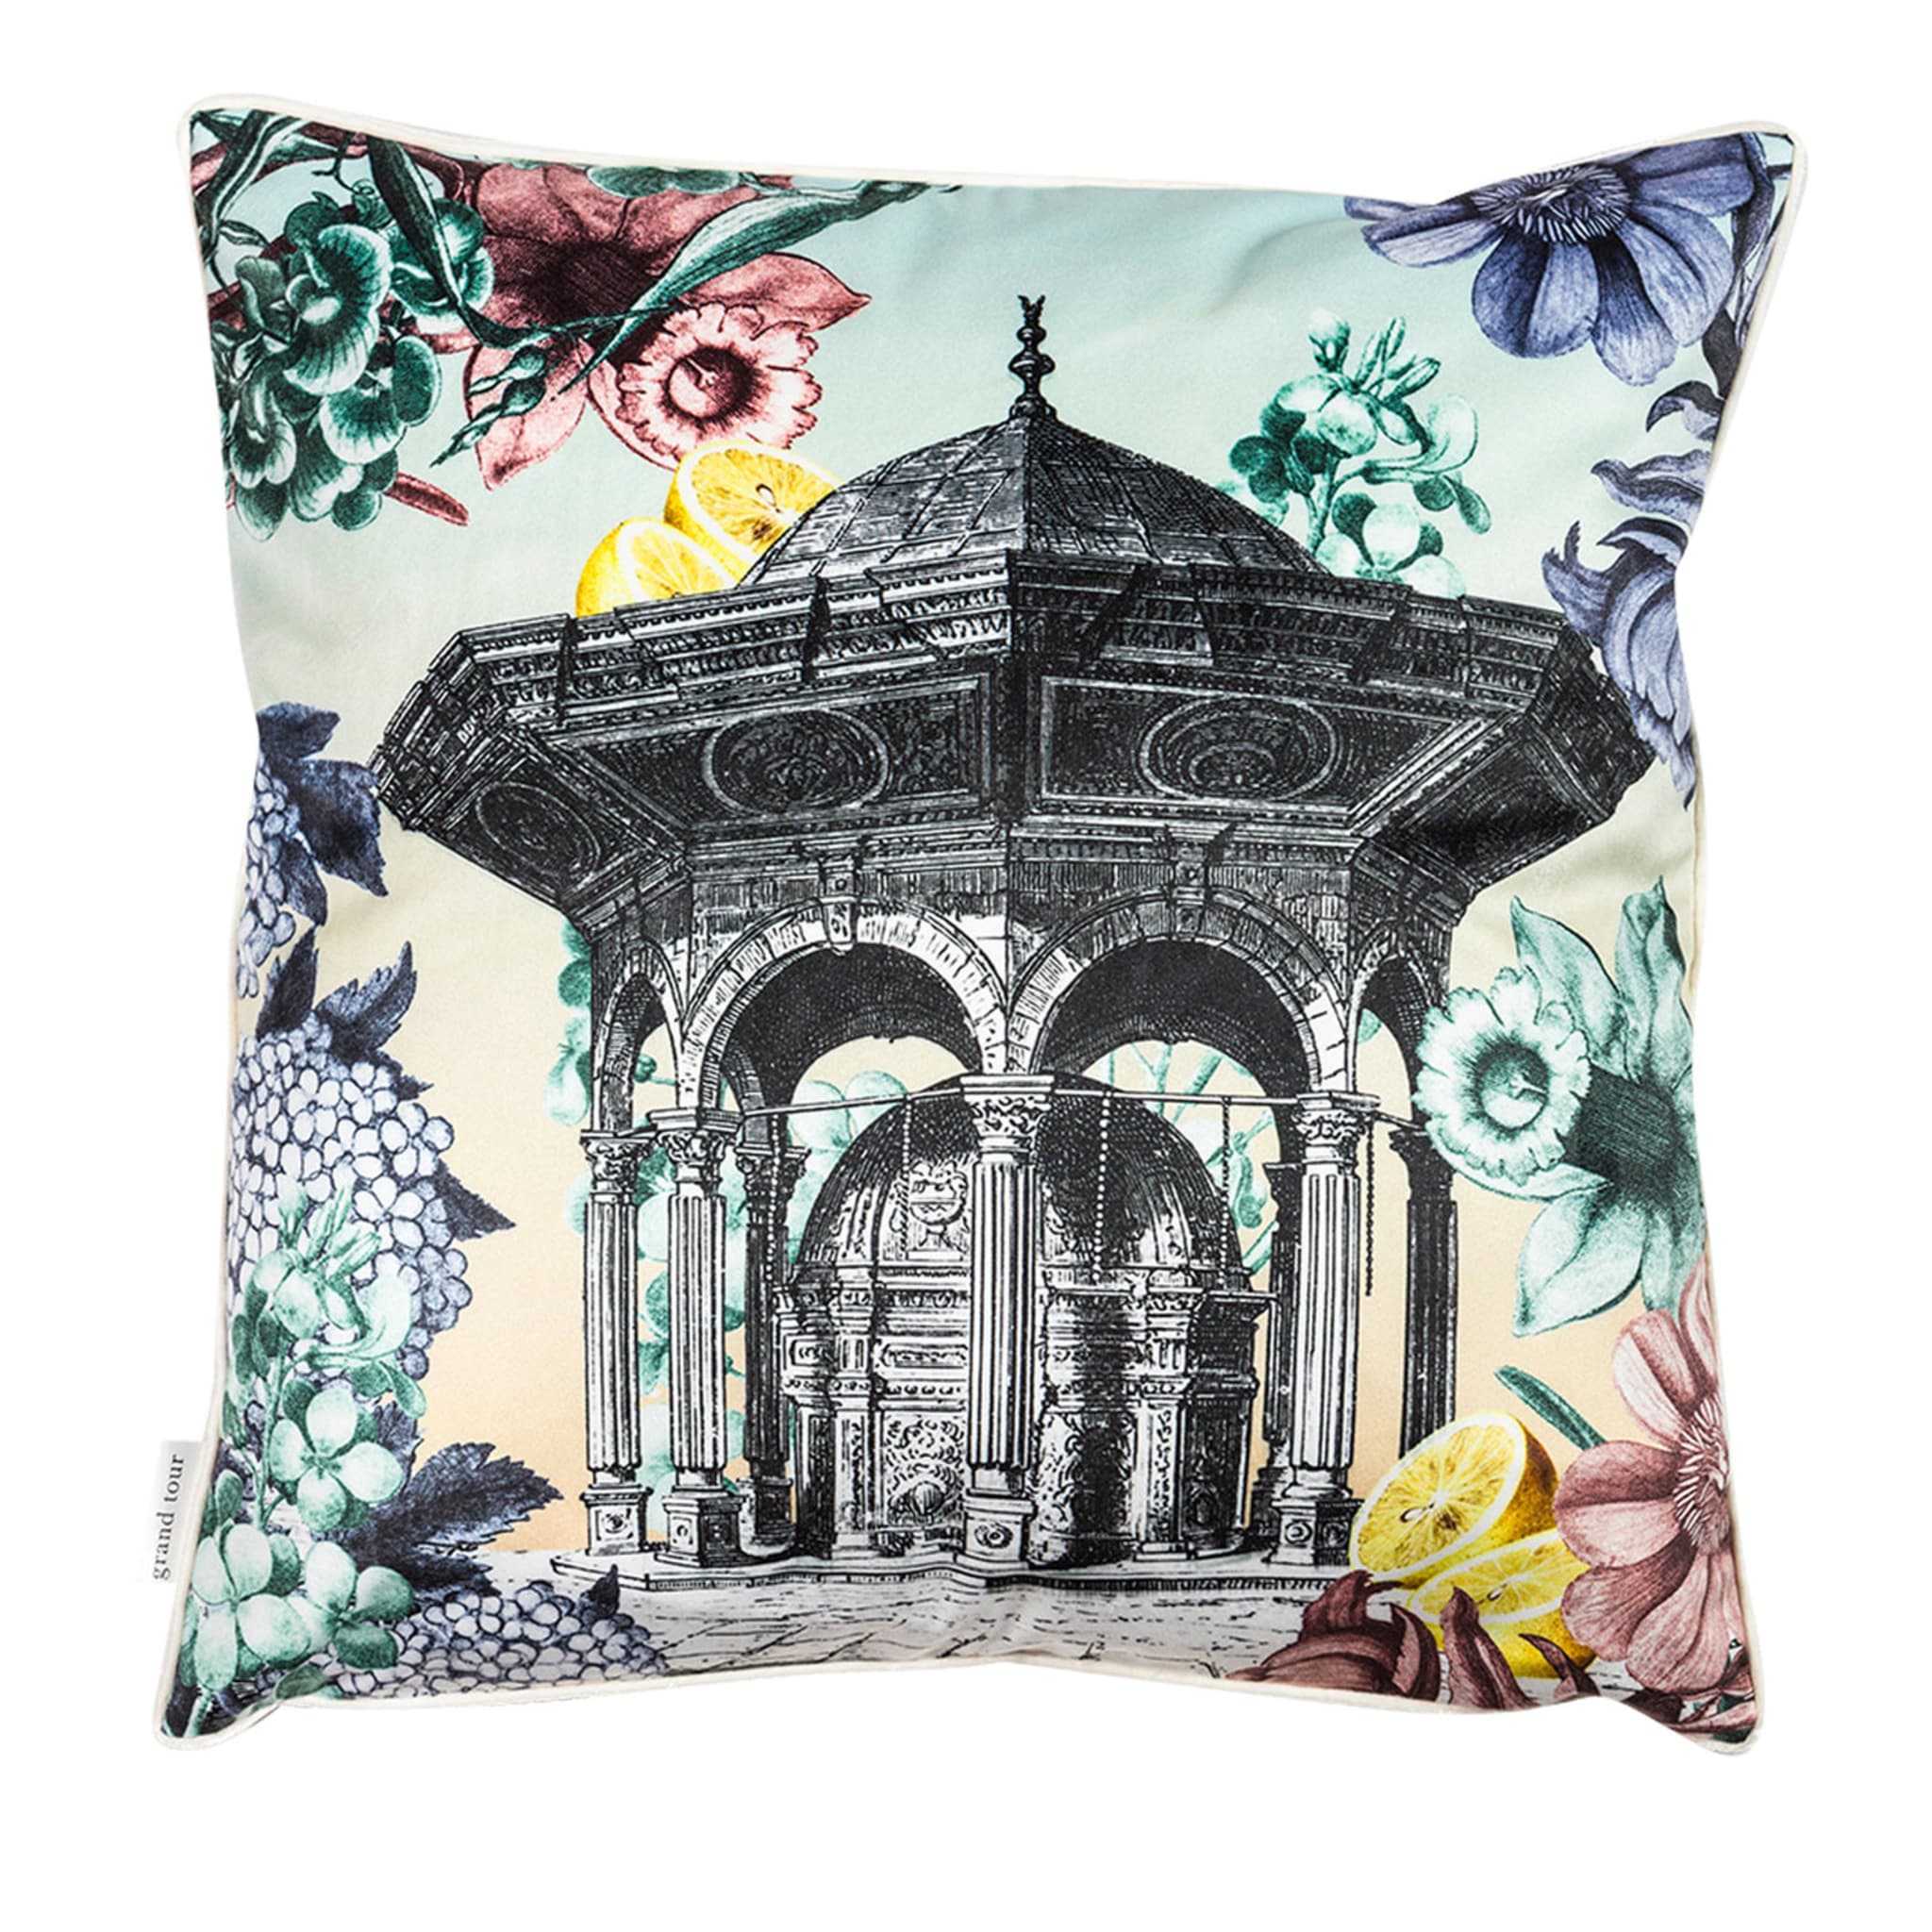 Cairo Velvet Cushion With Landscape And Flowers #6 - Main view